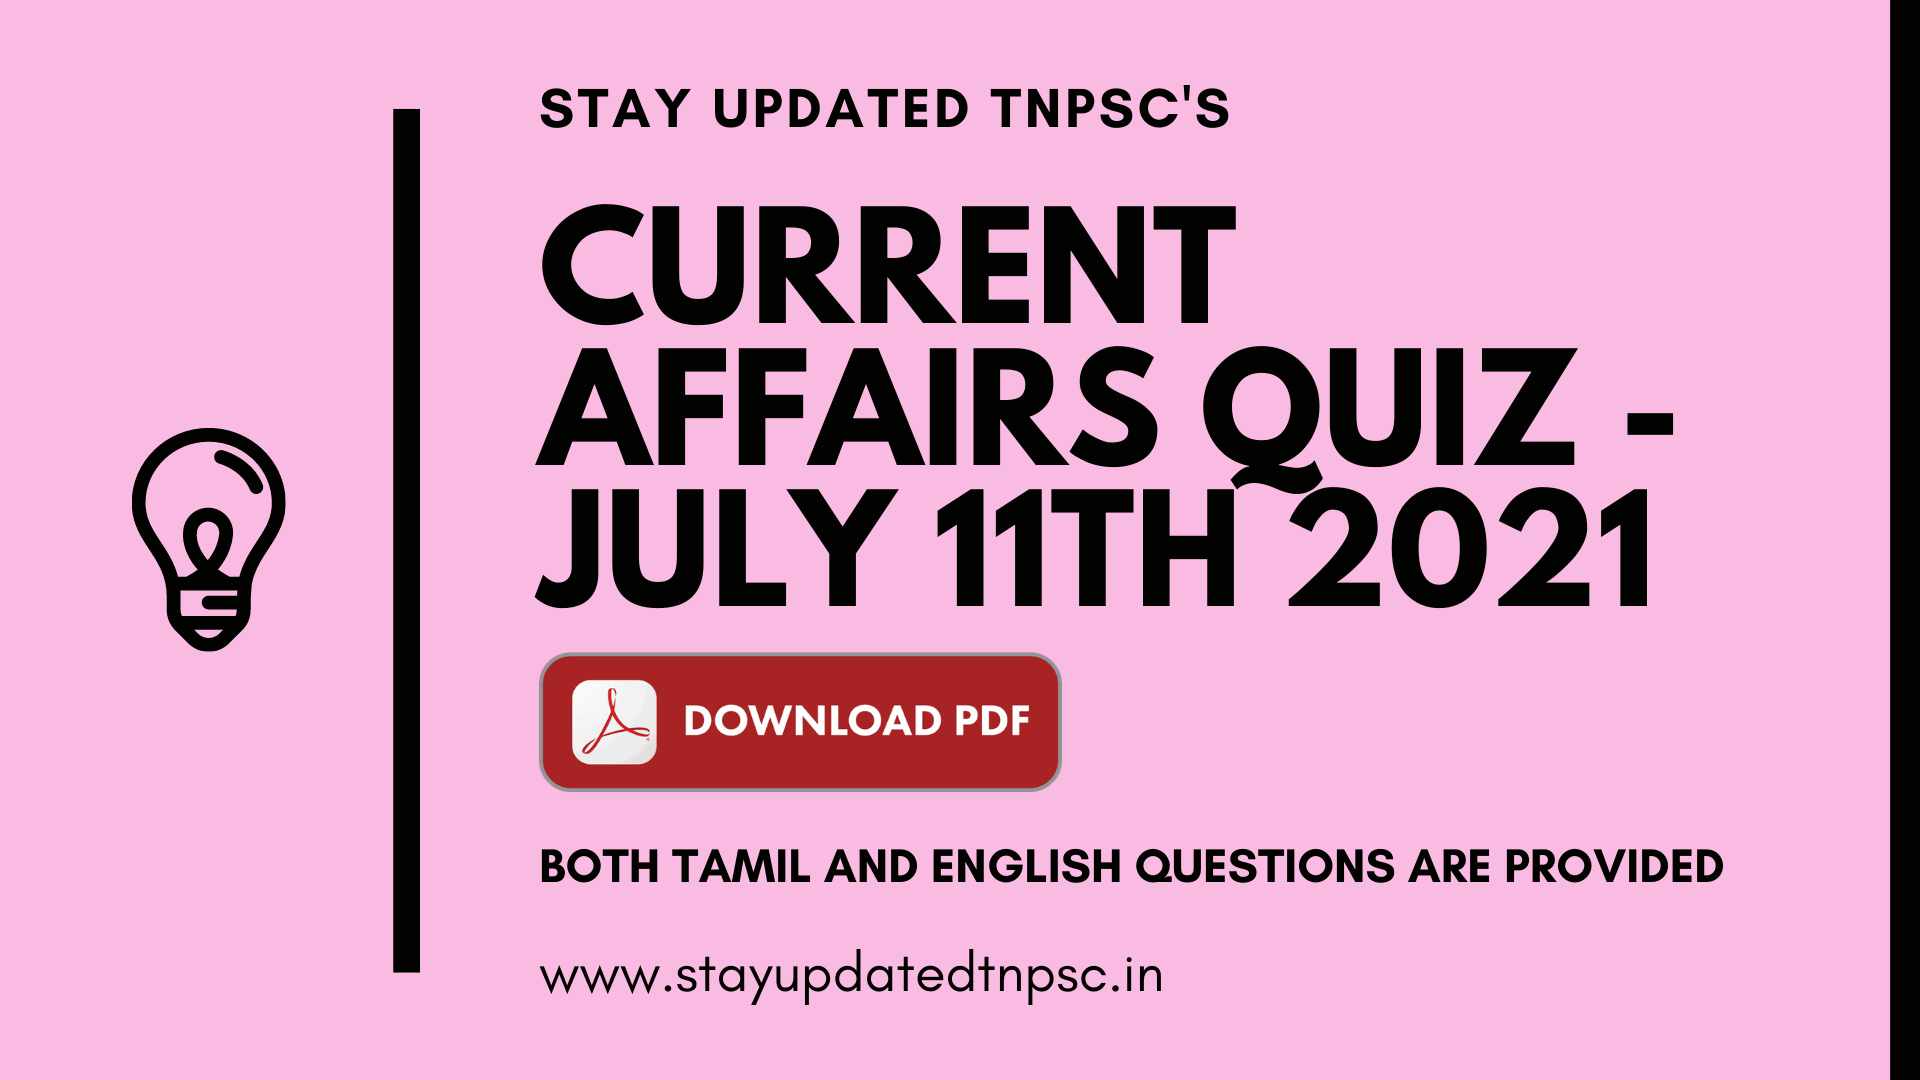 TNPSC DAILY CURRENT AFFAIRS: 11 JUNE 2021 TNPSC தினசரி நடப்பு நிகழ்வுகள்: 11 ஜூன் 2021 BOTH TAMIL AND ENGLISH QUESTIONS ARE PROVIDED DOWNLOAD PDF AT THE END OF THE QUESTIONS